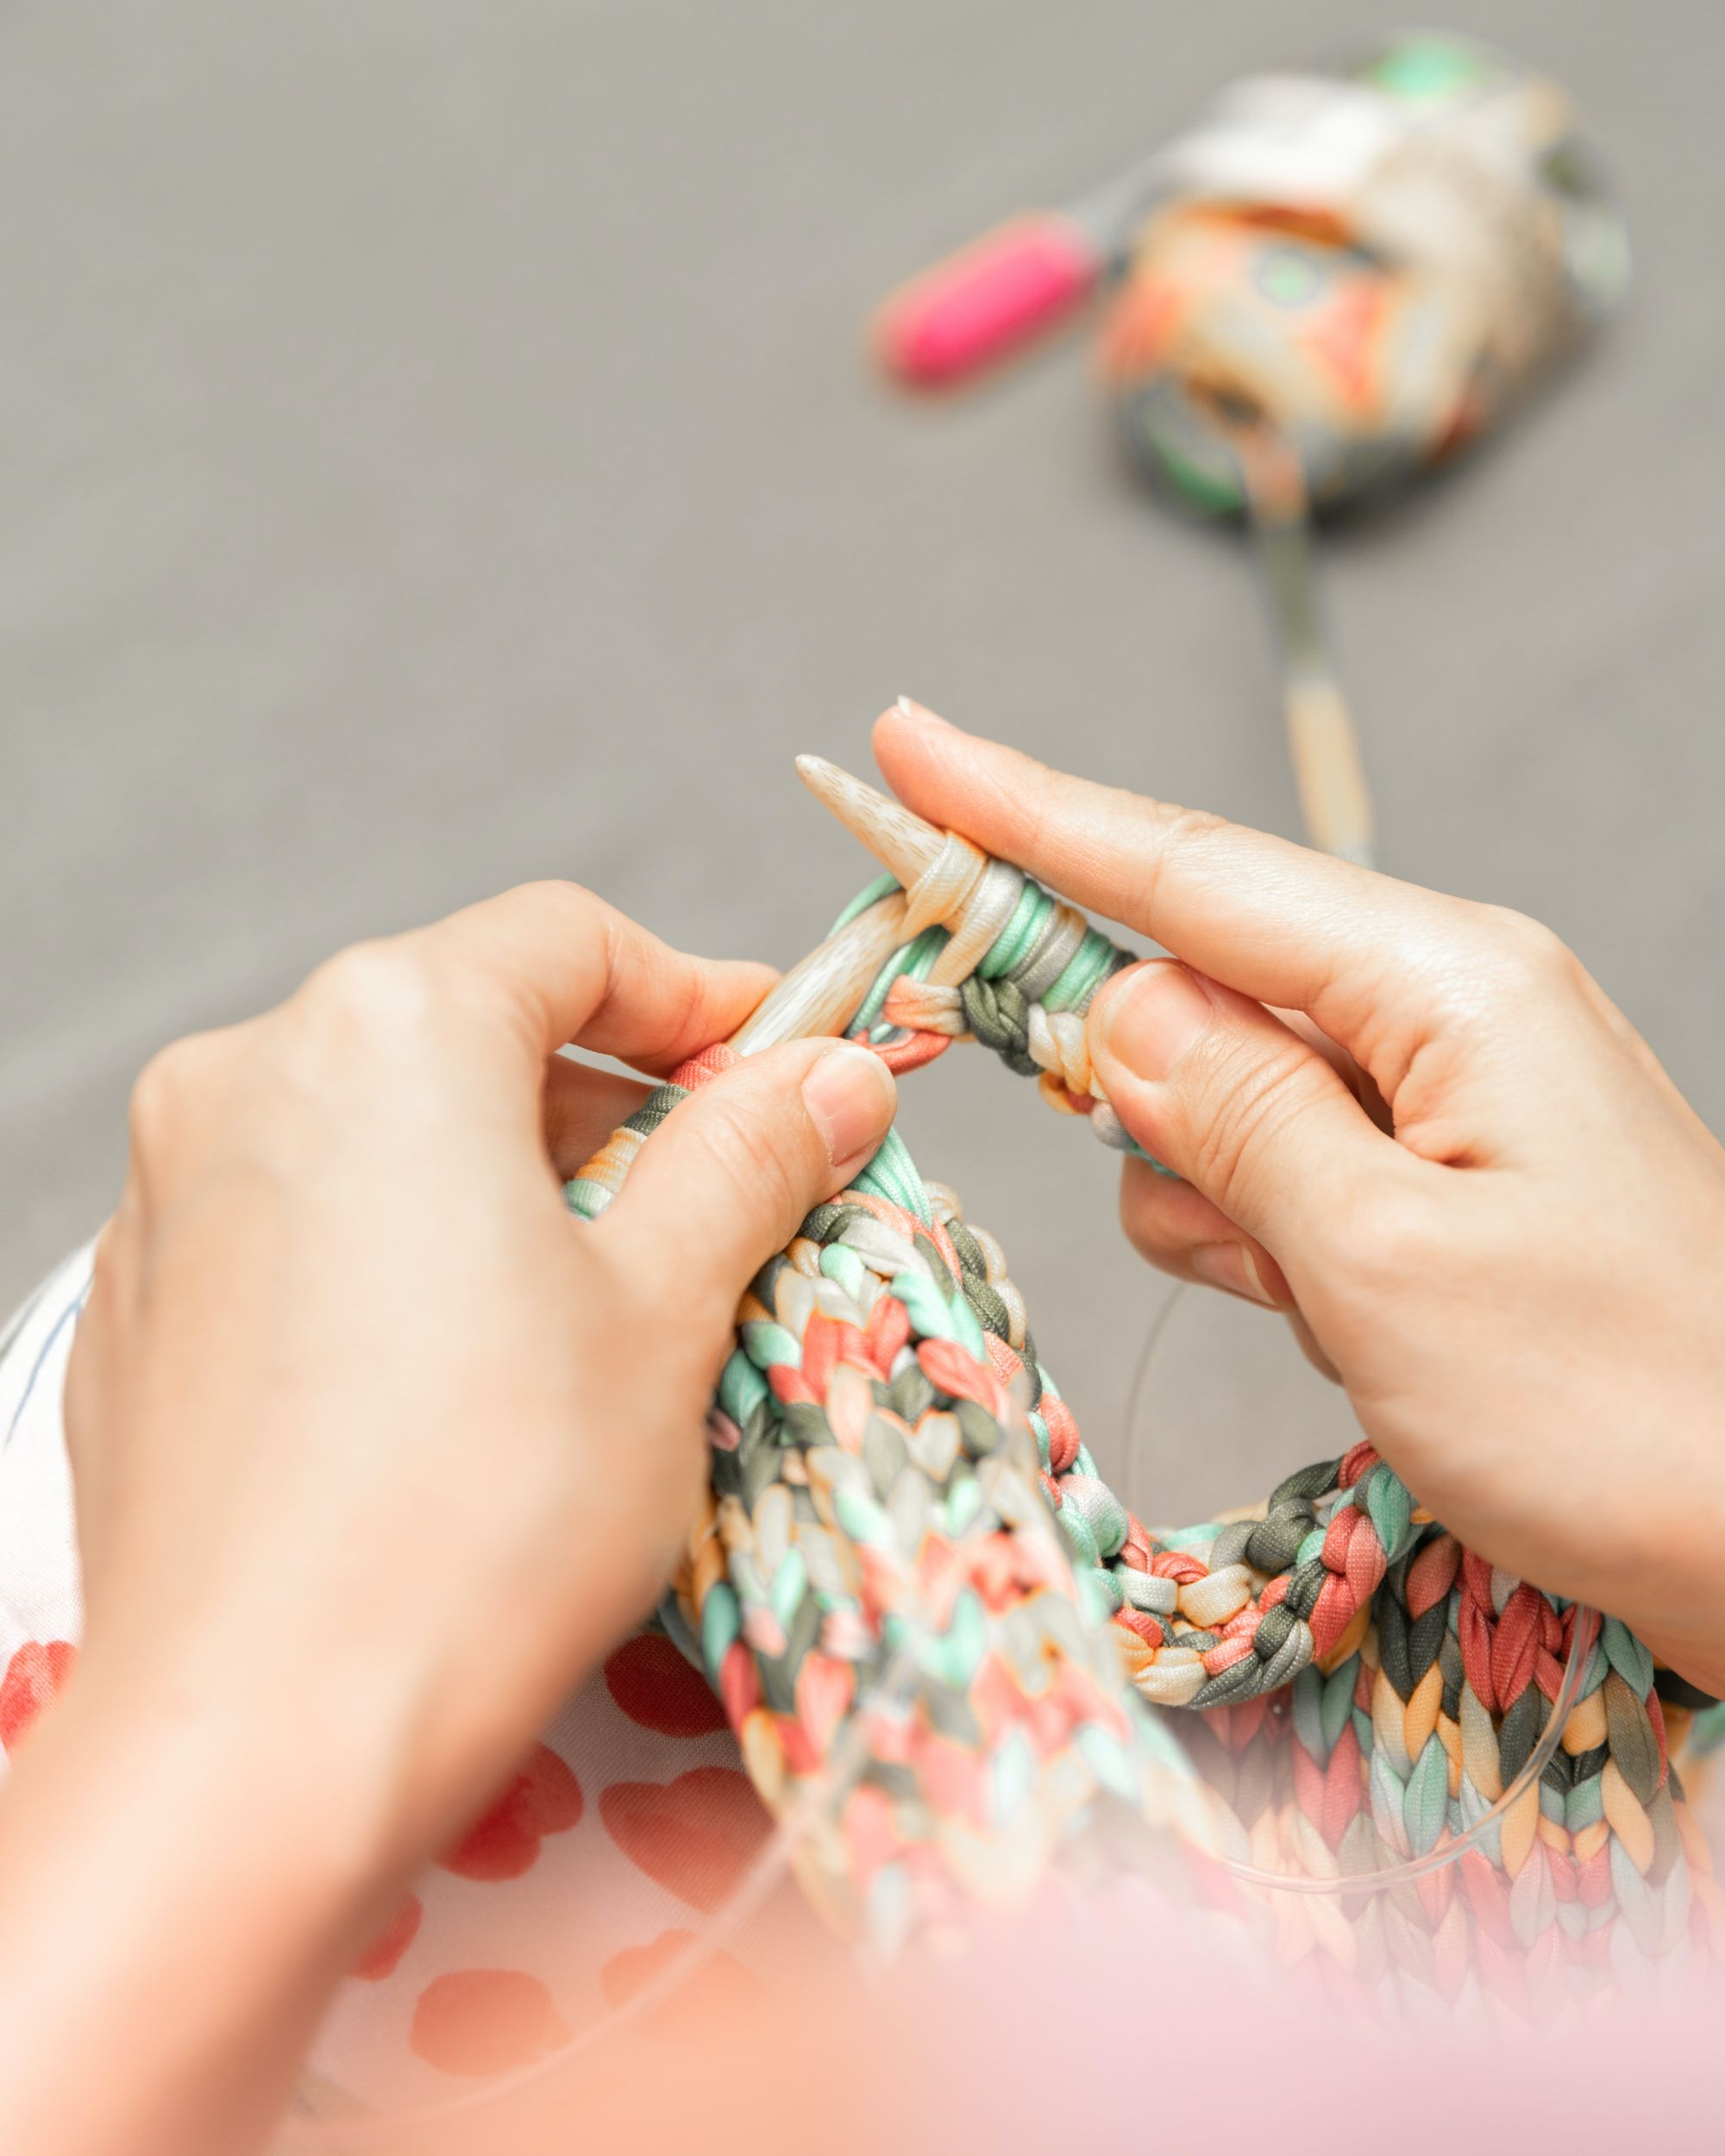 Image of hands knitting